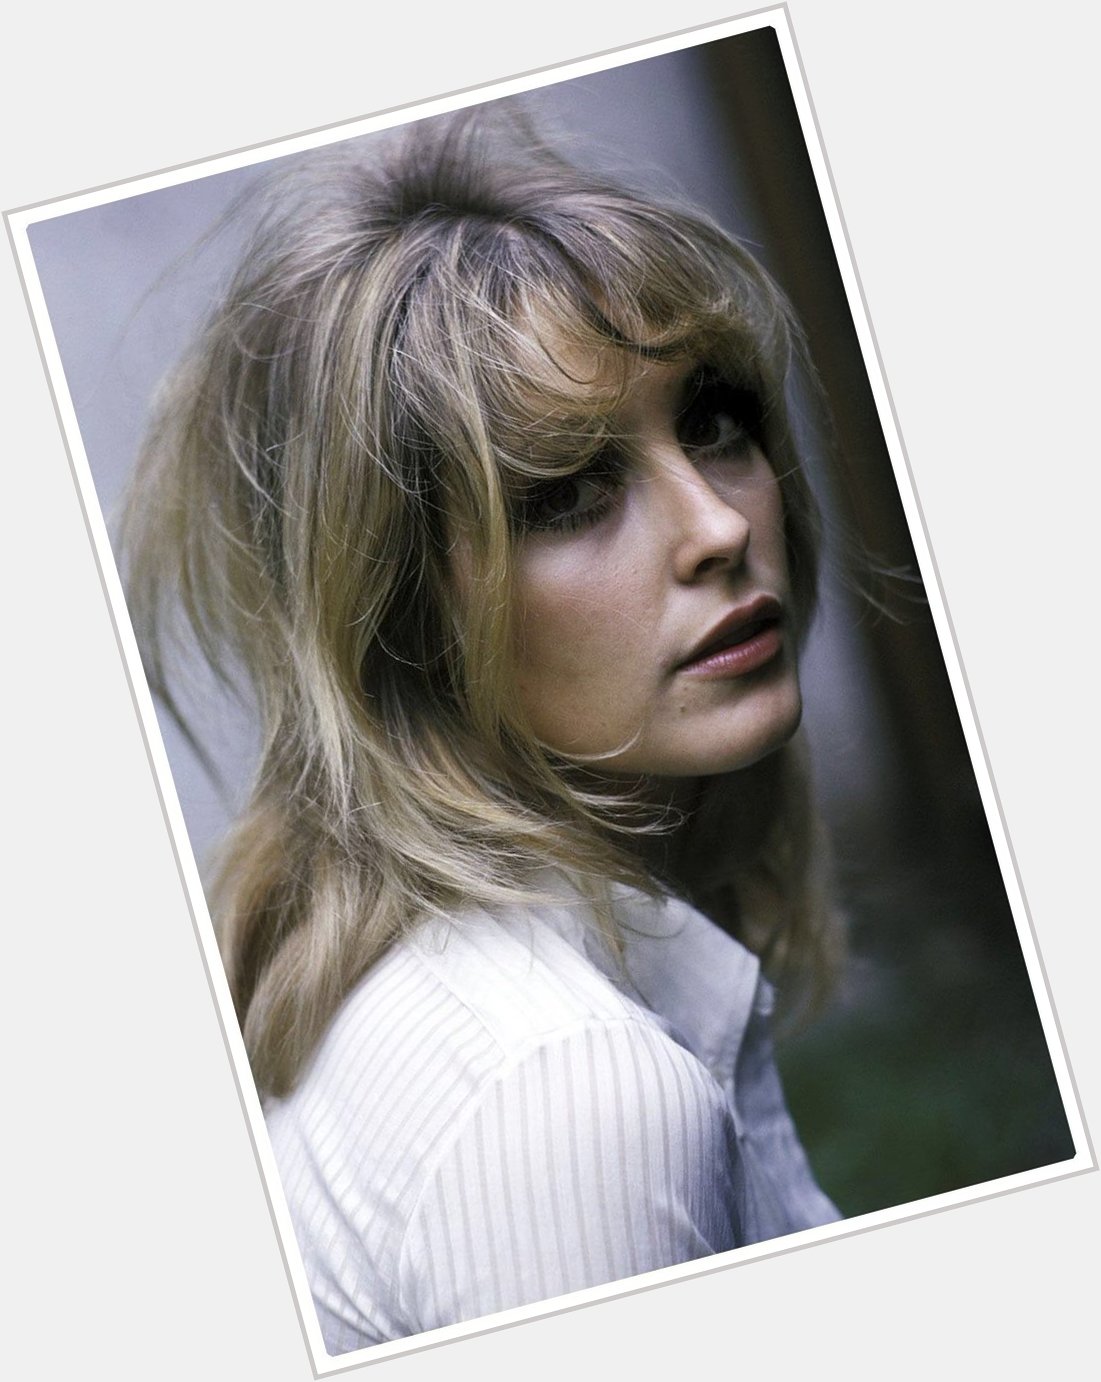 Happy Birthday Sharon Tate. The biggest broken heart of all. Wishing her family the best. 